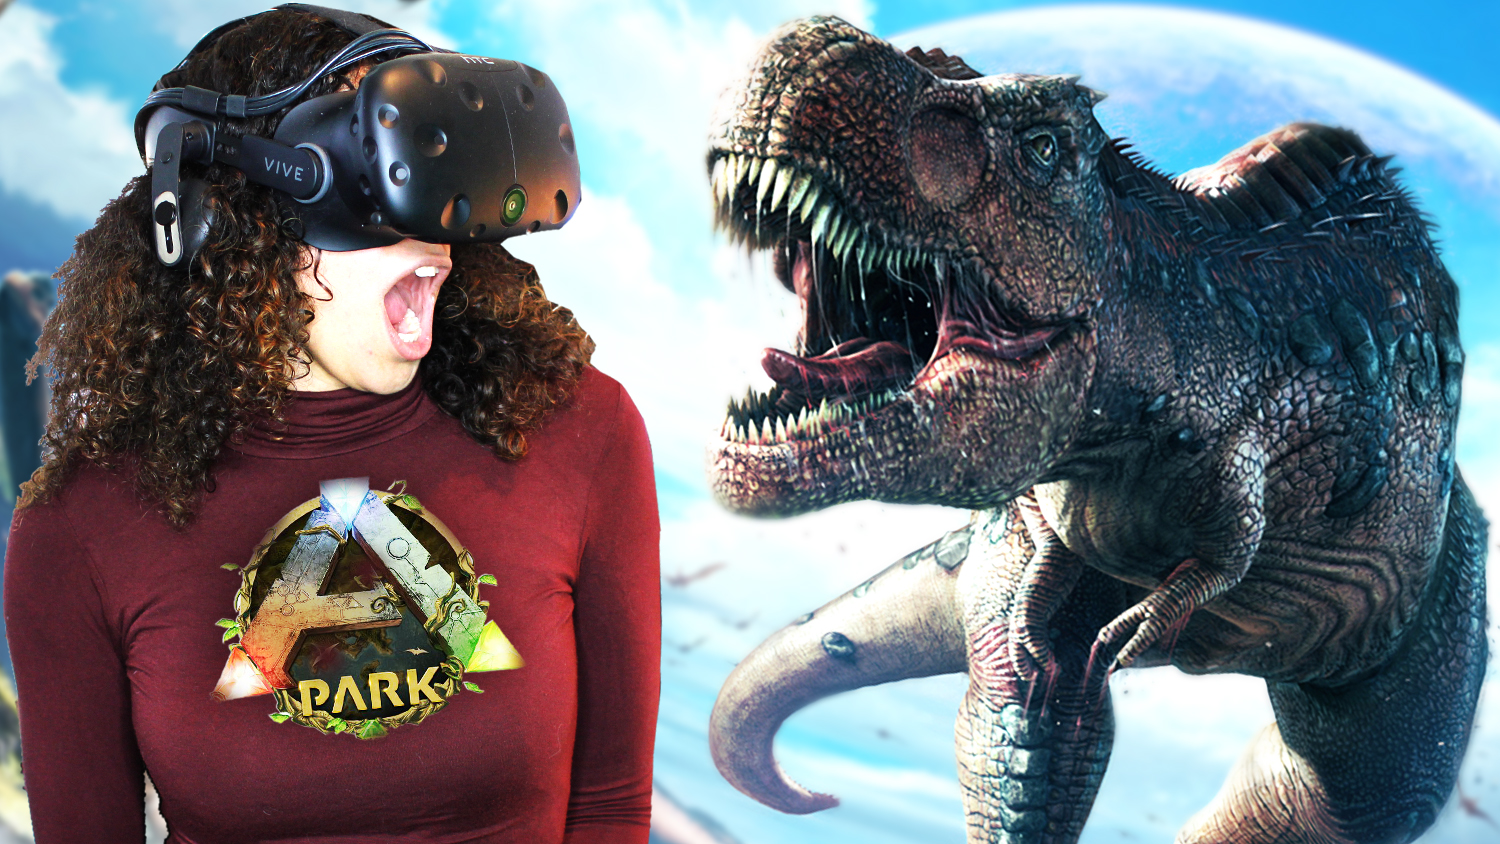 Meeting A Giganotosaurus In Virtual Reality Ark Park Vr Gameplay Part 1 Htc Vive Cas And Chary Vr